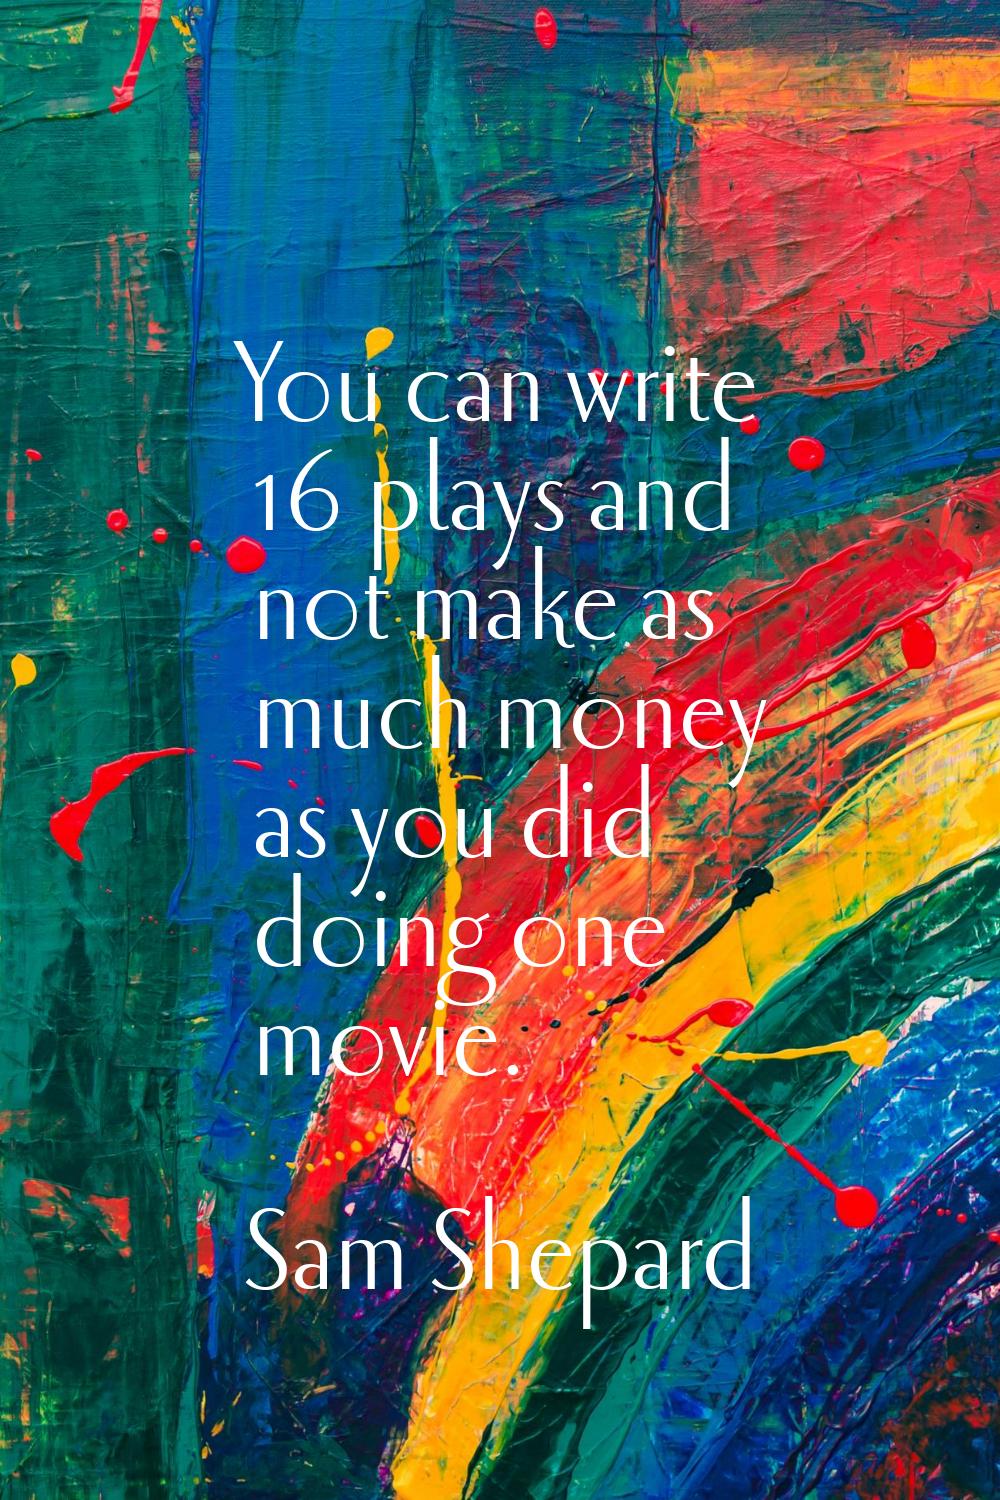 You can write 16 plays and not make as much money as you did doing one movie.